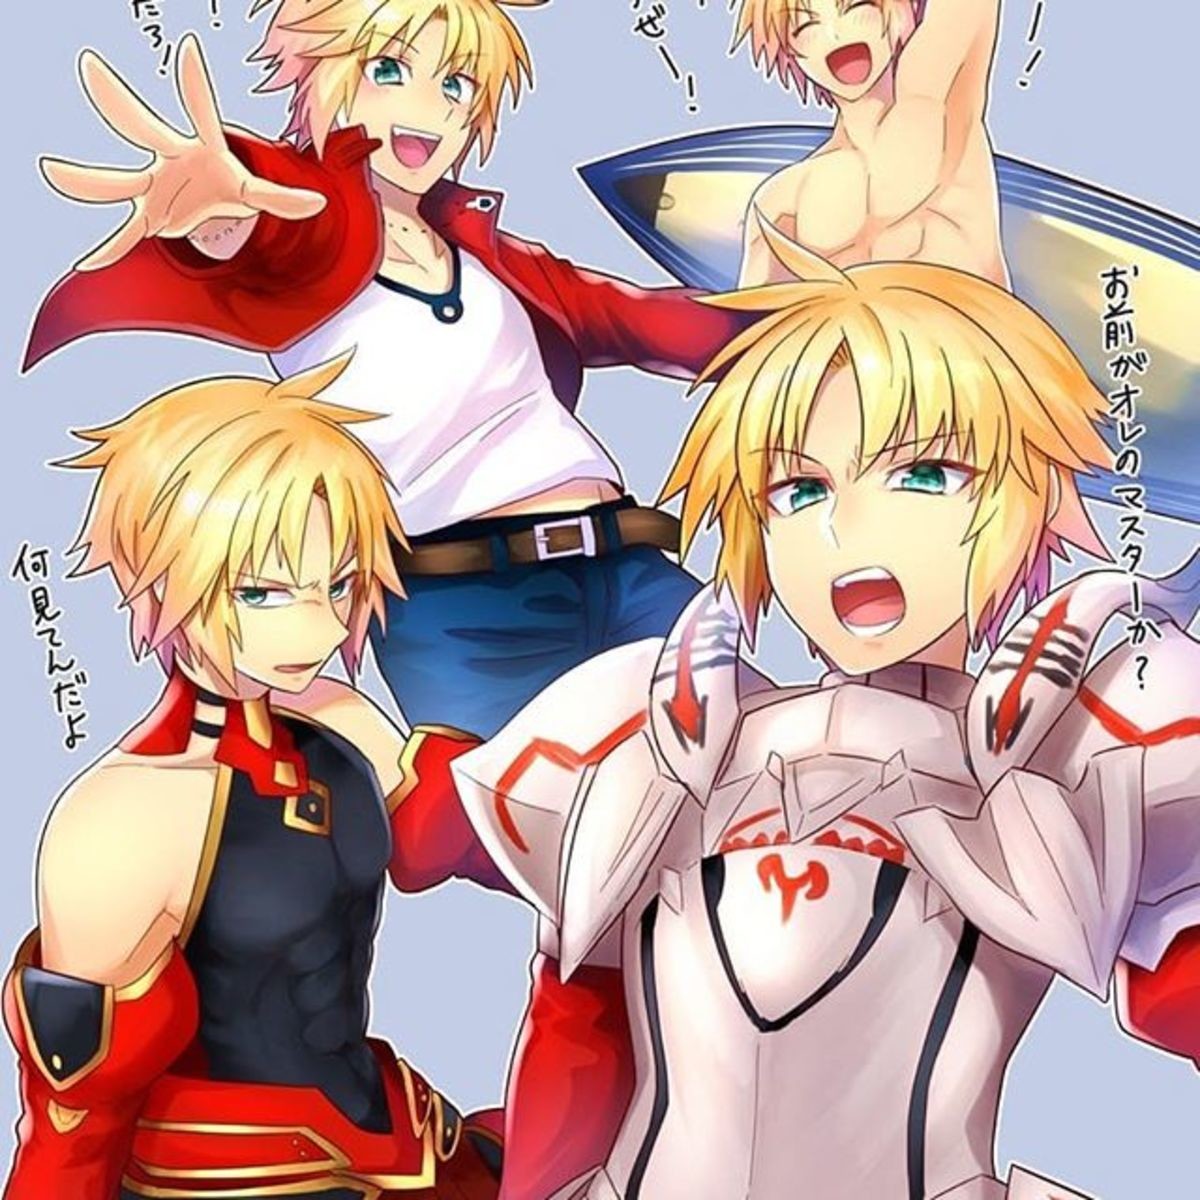 Male Mordred. .. MRW genderbent Mordred makes me question my heterosexuality significantly more than traps ever have.